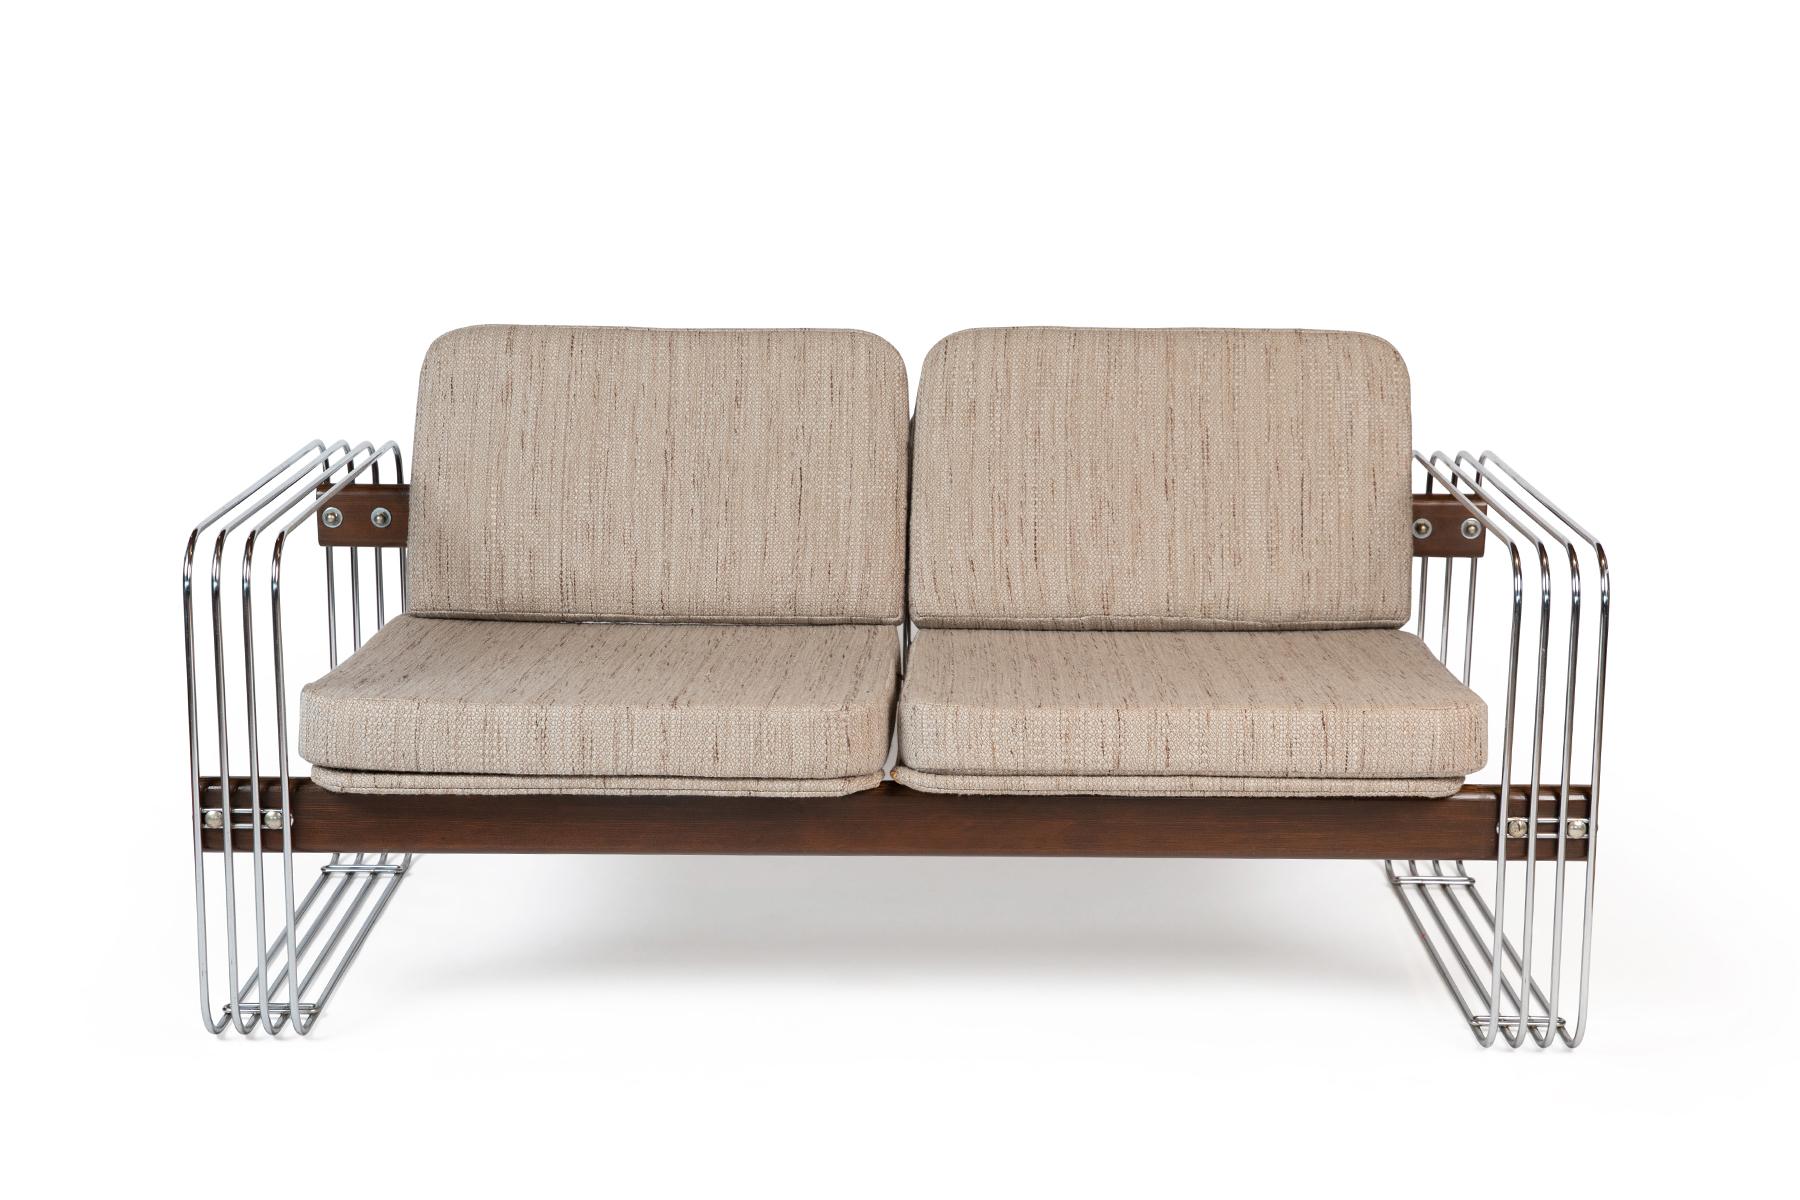 This light and airy modernist two-seater setee by Stendig in a neutral oatmeal Knoll Rivington upholstery is complemented by polished steel arm details and wood trim. Check out our other listing for a matching full-size Stendig sofa.